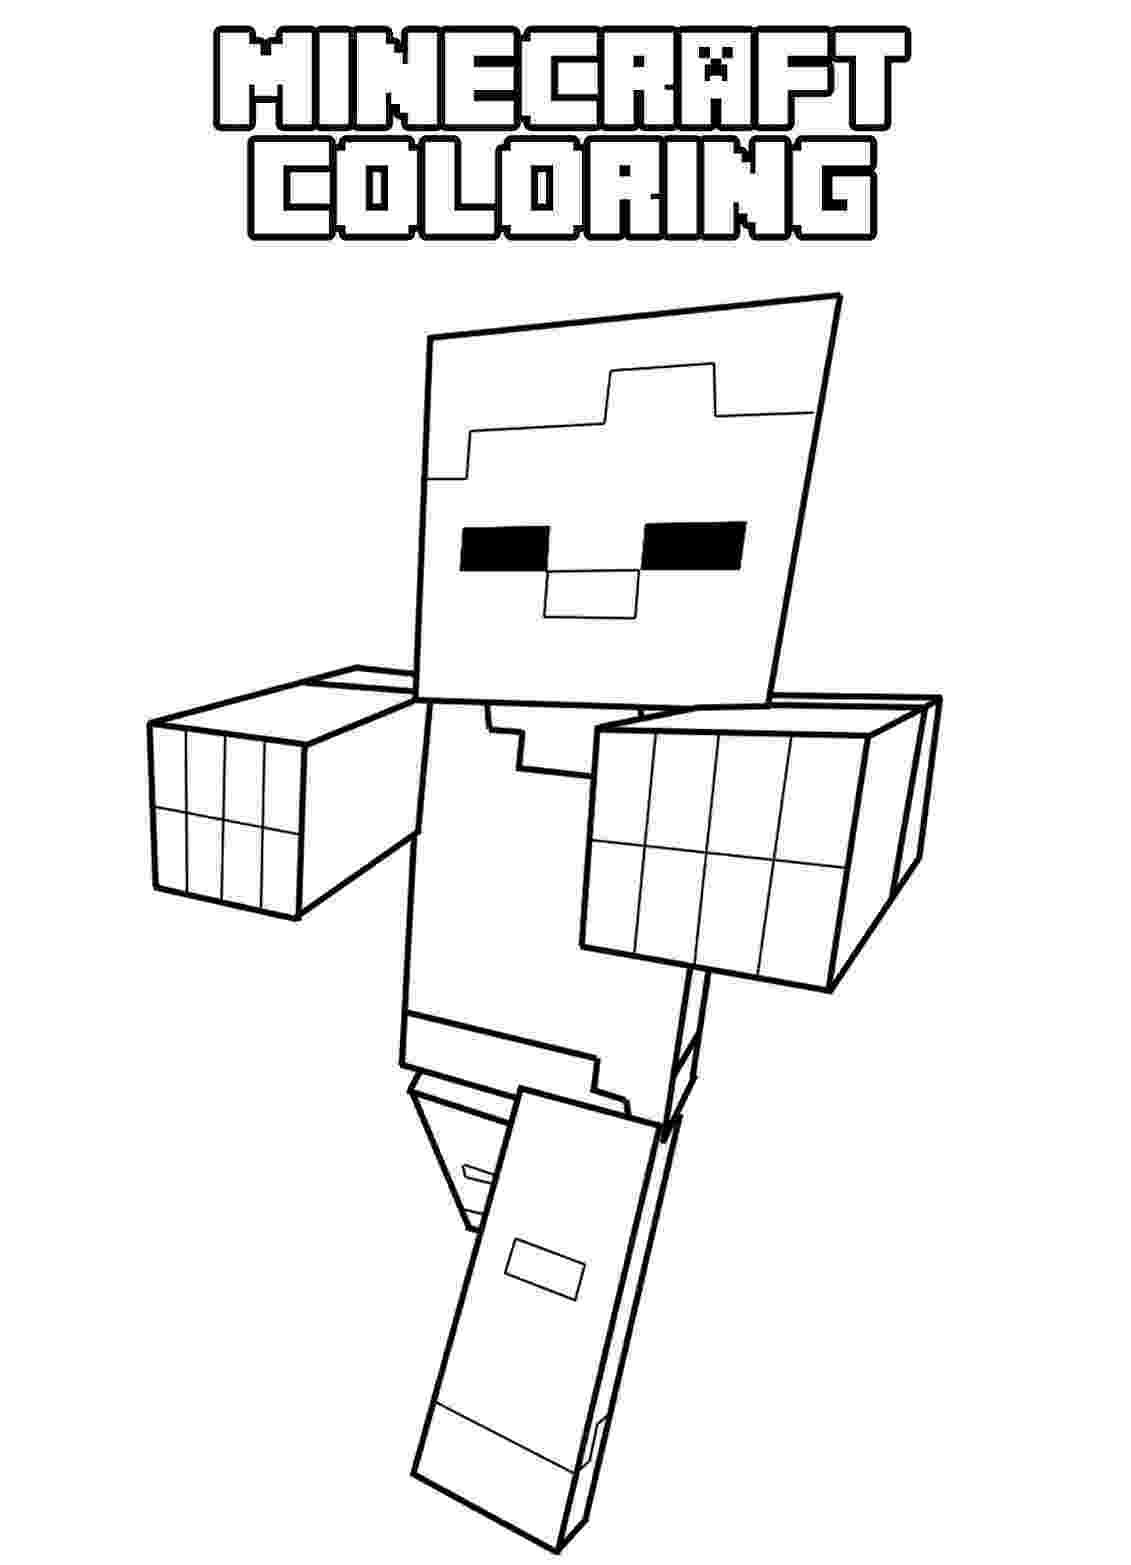 minecraft coloring sheets free 24 awesome printable minecraft coloring pages for toddlers minecraft free coloring sheets 